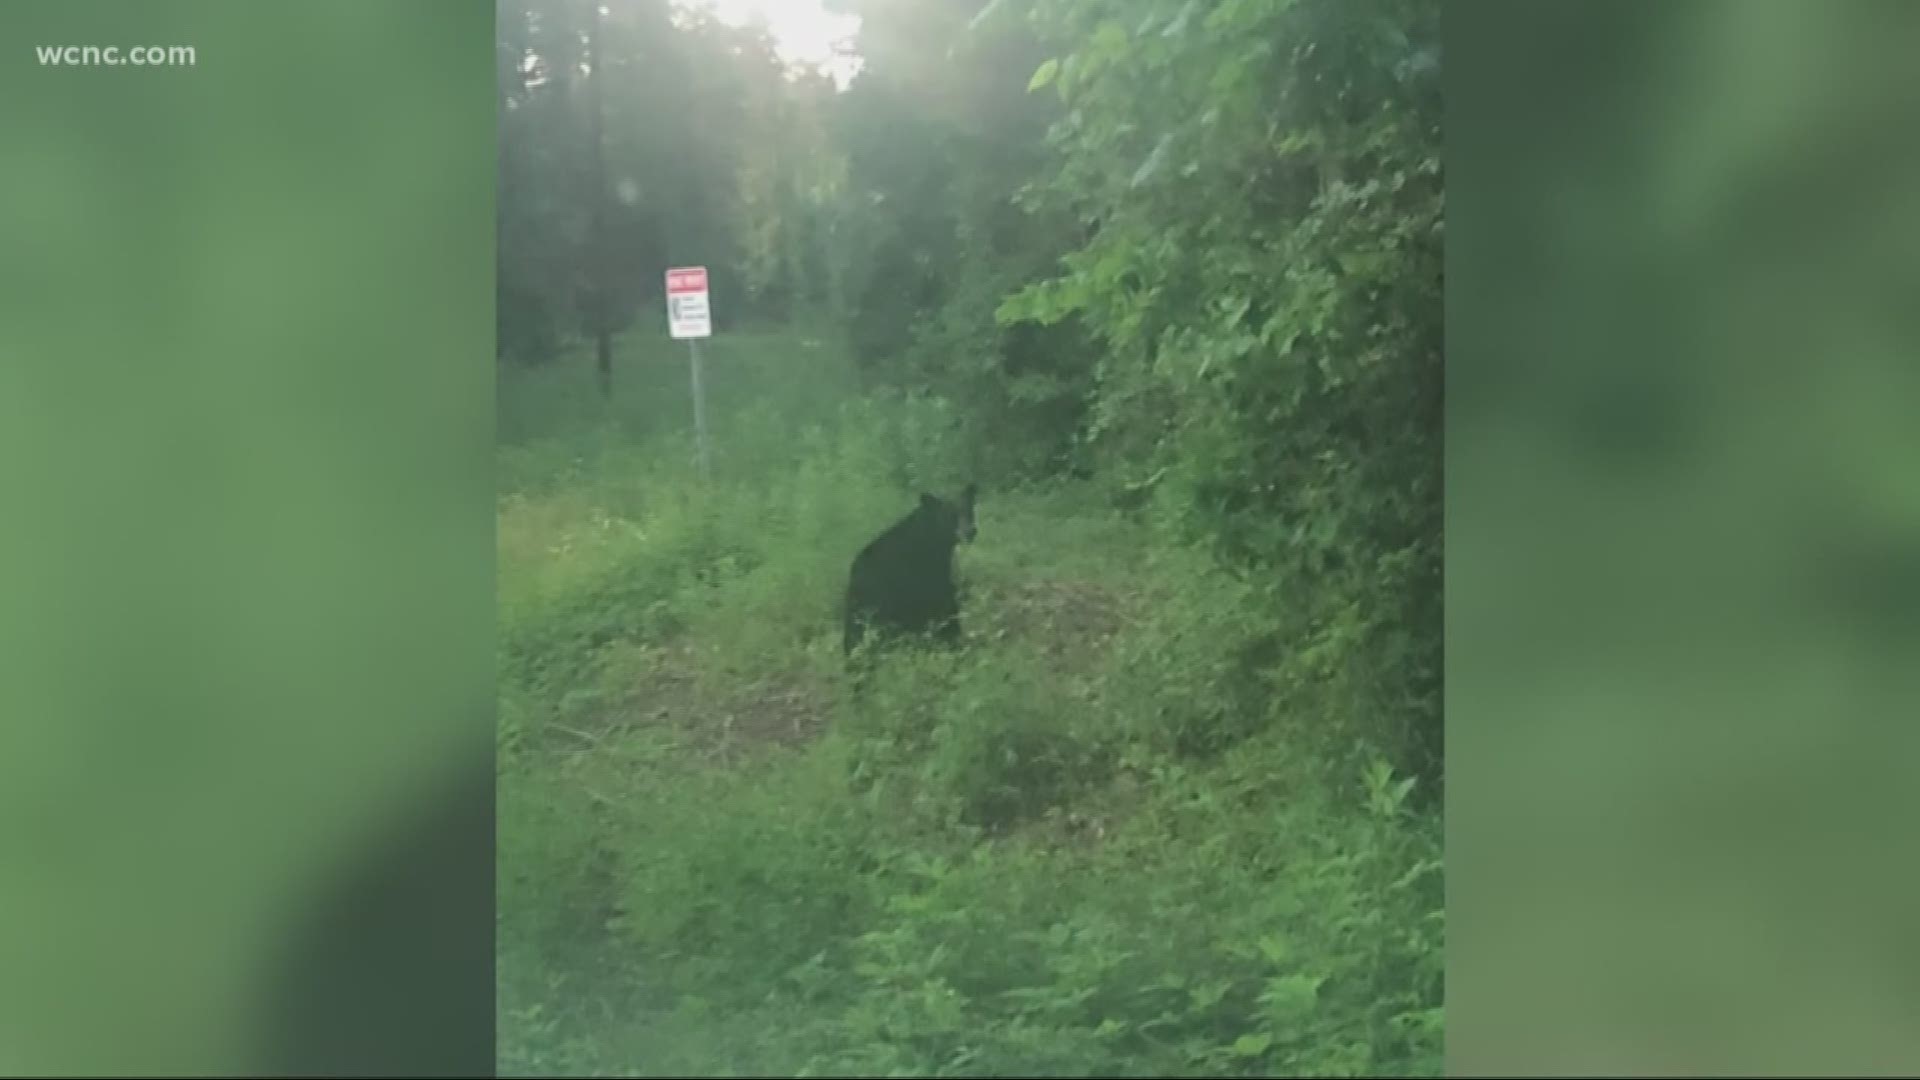 The man who took the picture tells us the bear was eating from a big bag of trash left on the side of the road.